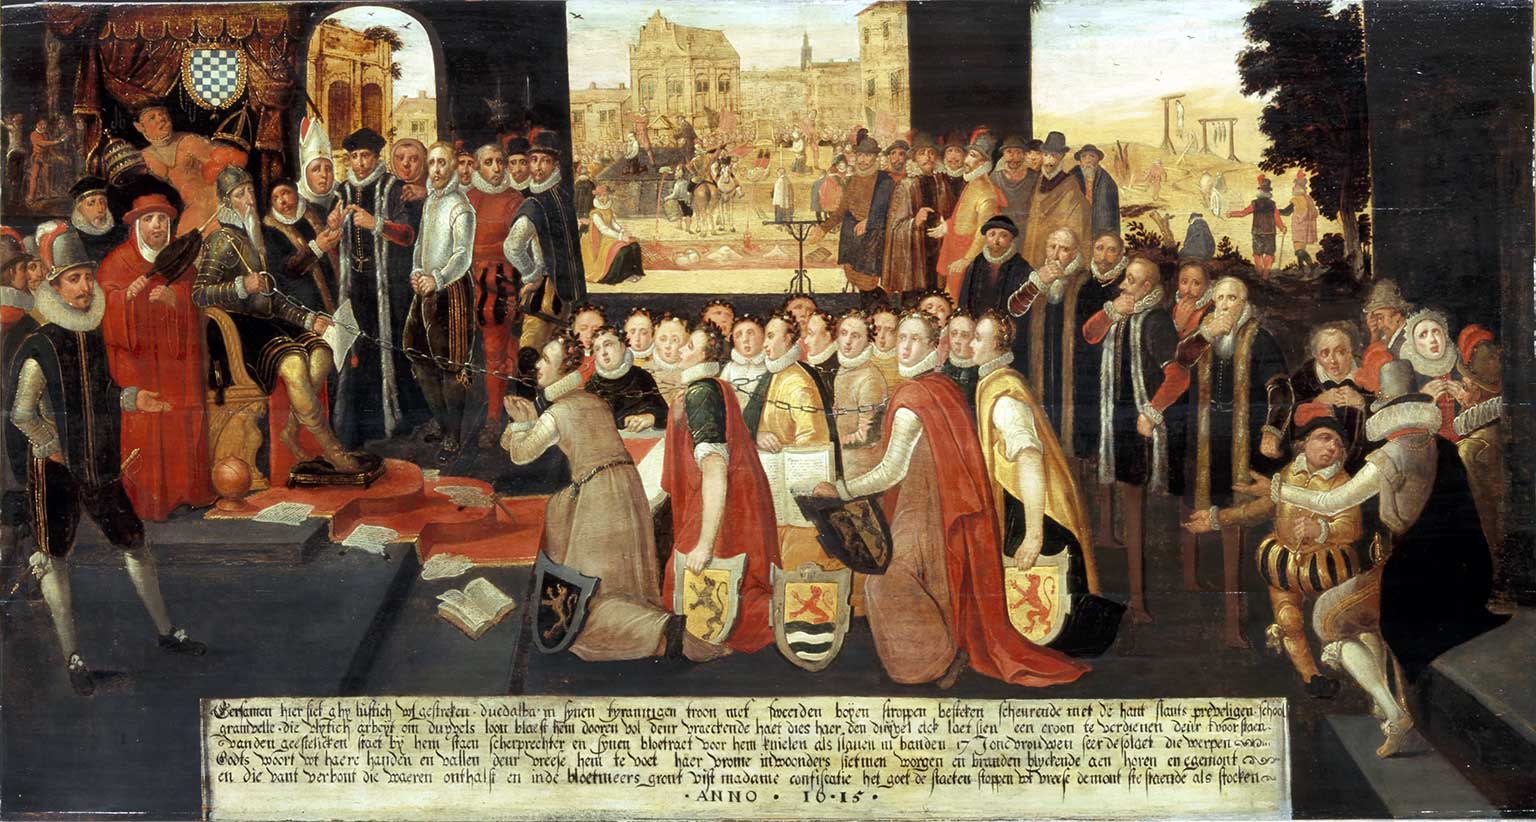 Oil painting with allegory of the tyranny of the Duke of Alba in the Netherlands